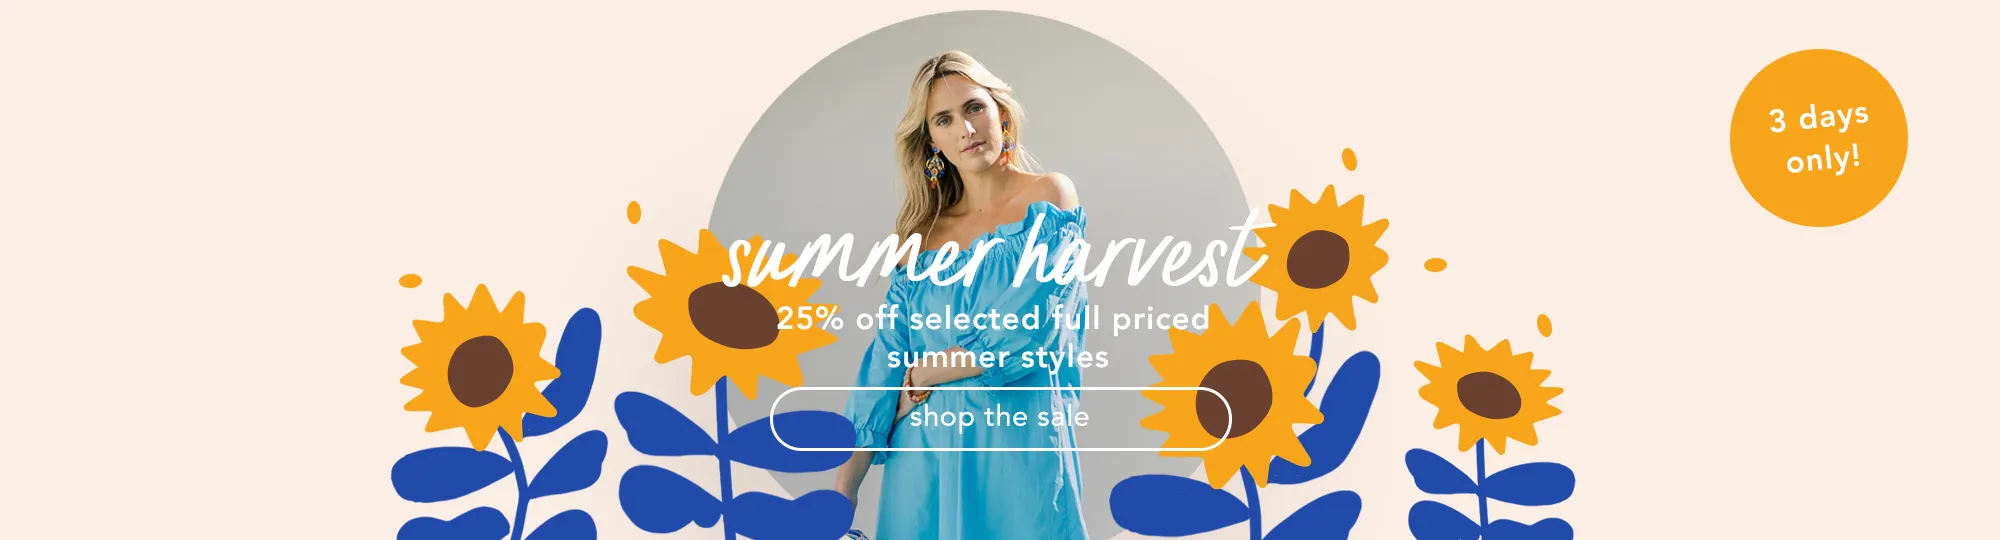 Birdsnest 3-Day sale: 25% OFF select full priced summer style